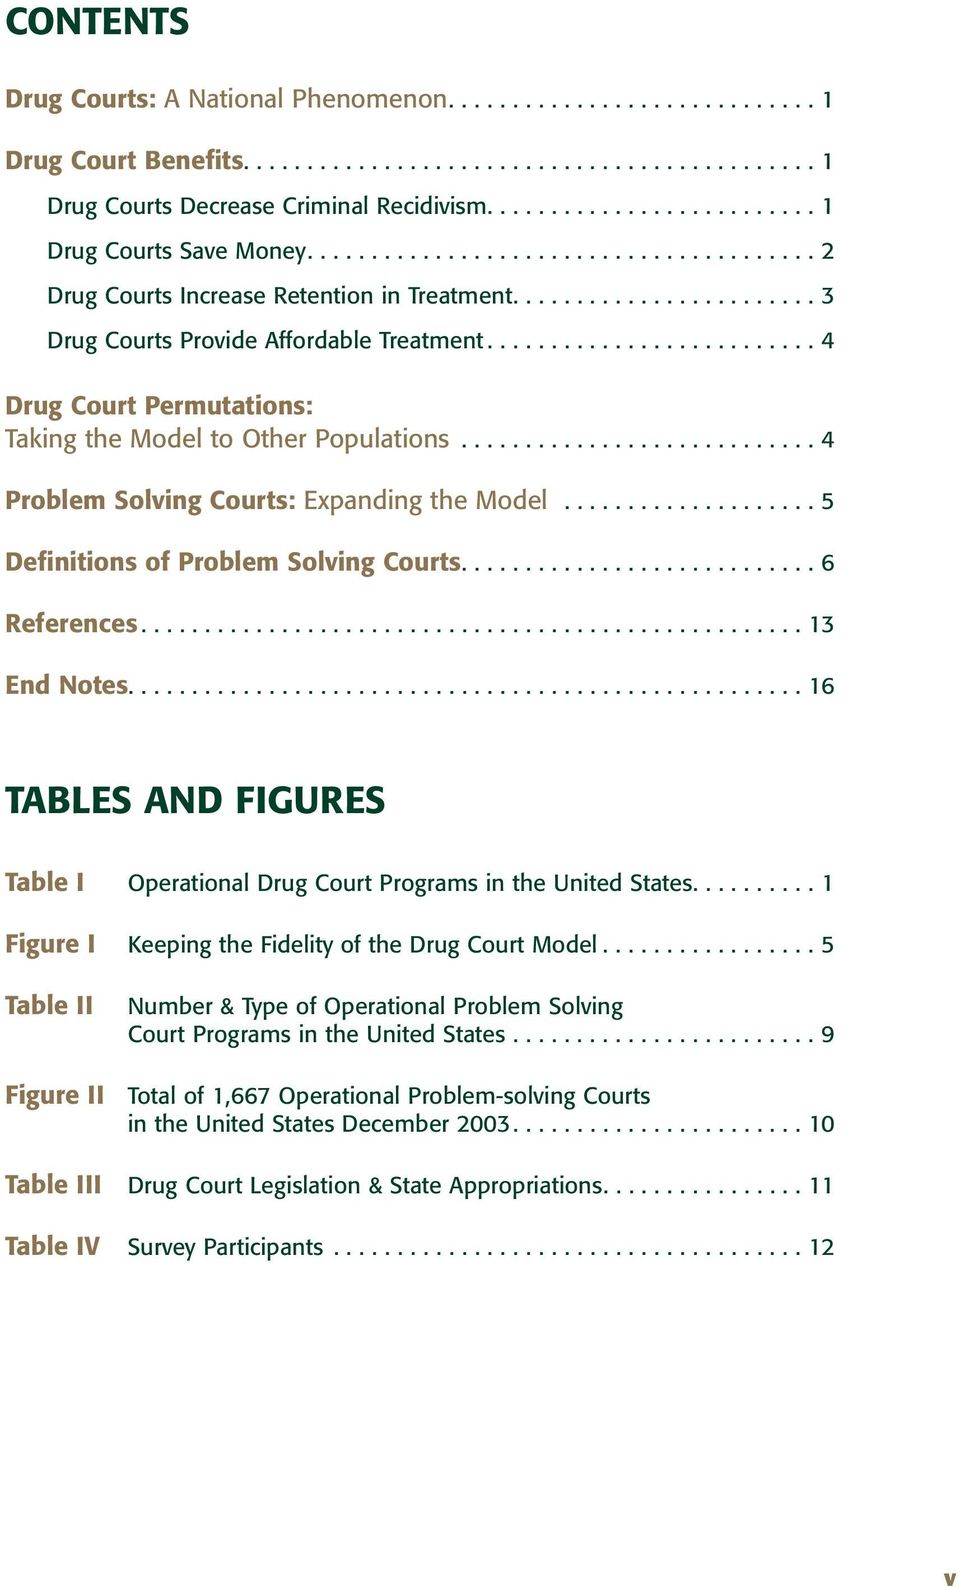 ......................... 4 Drug Court Permutations: Taking the Model to Other Populations............................ 4 Problem Solving Courts: Expanding the Model.